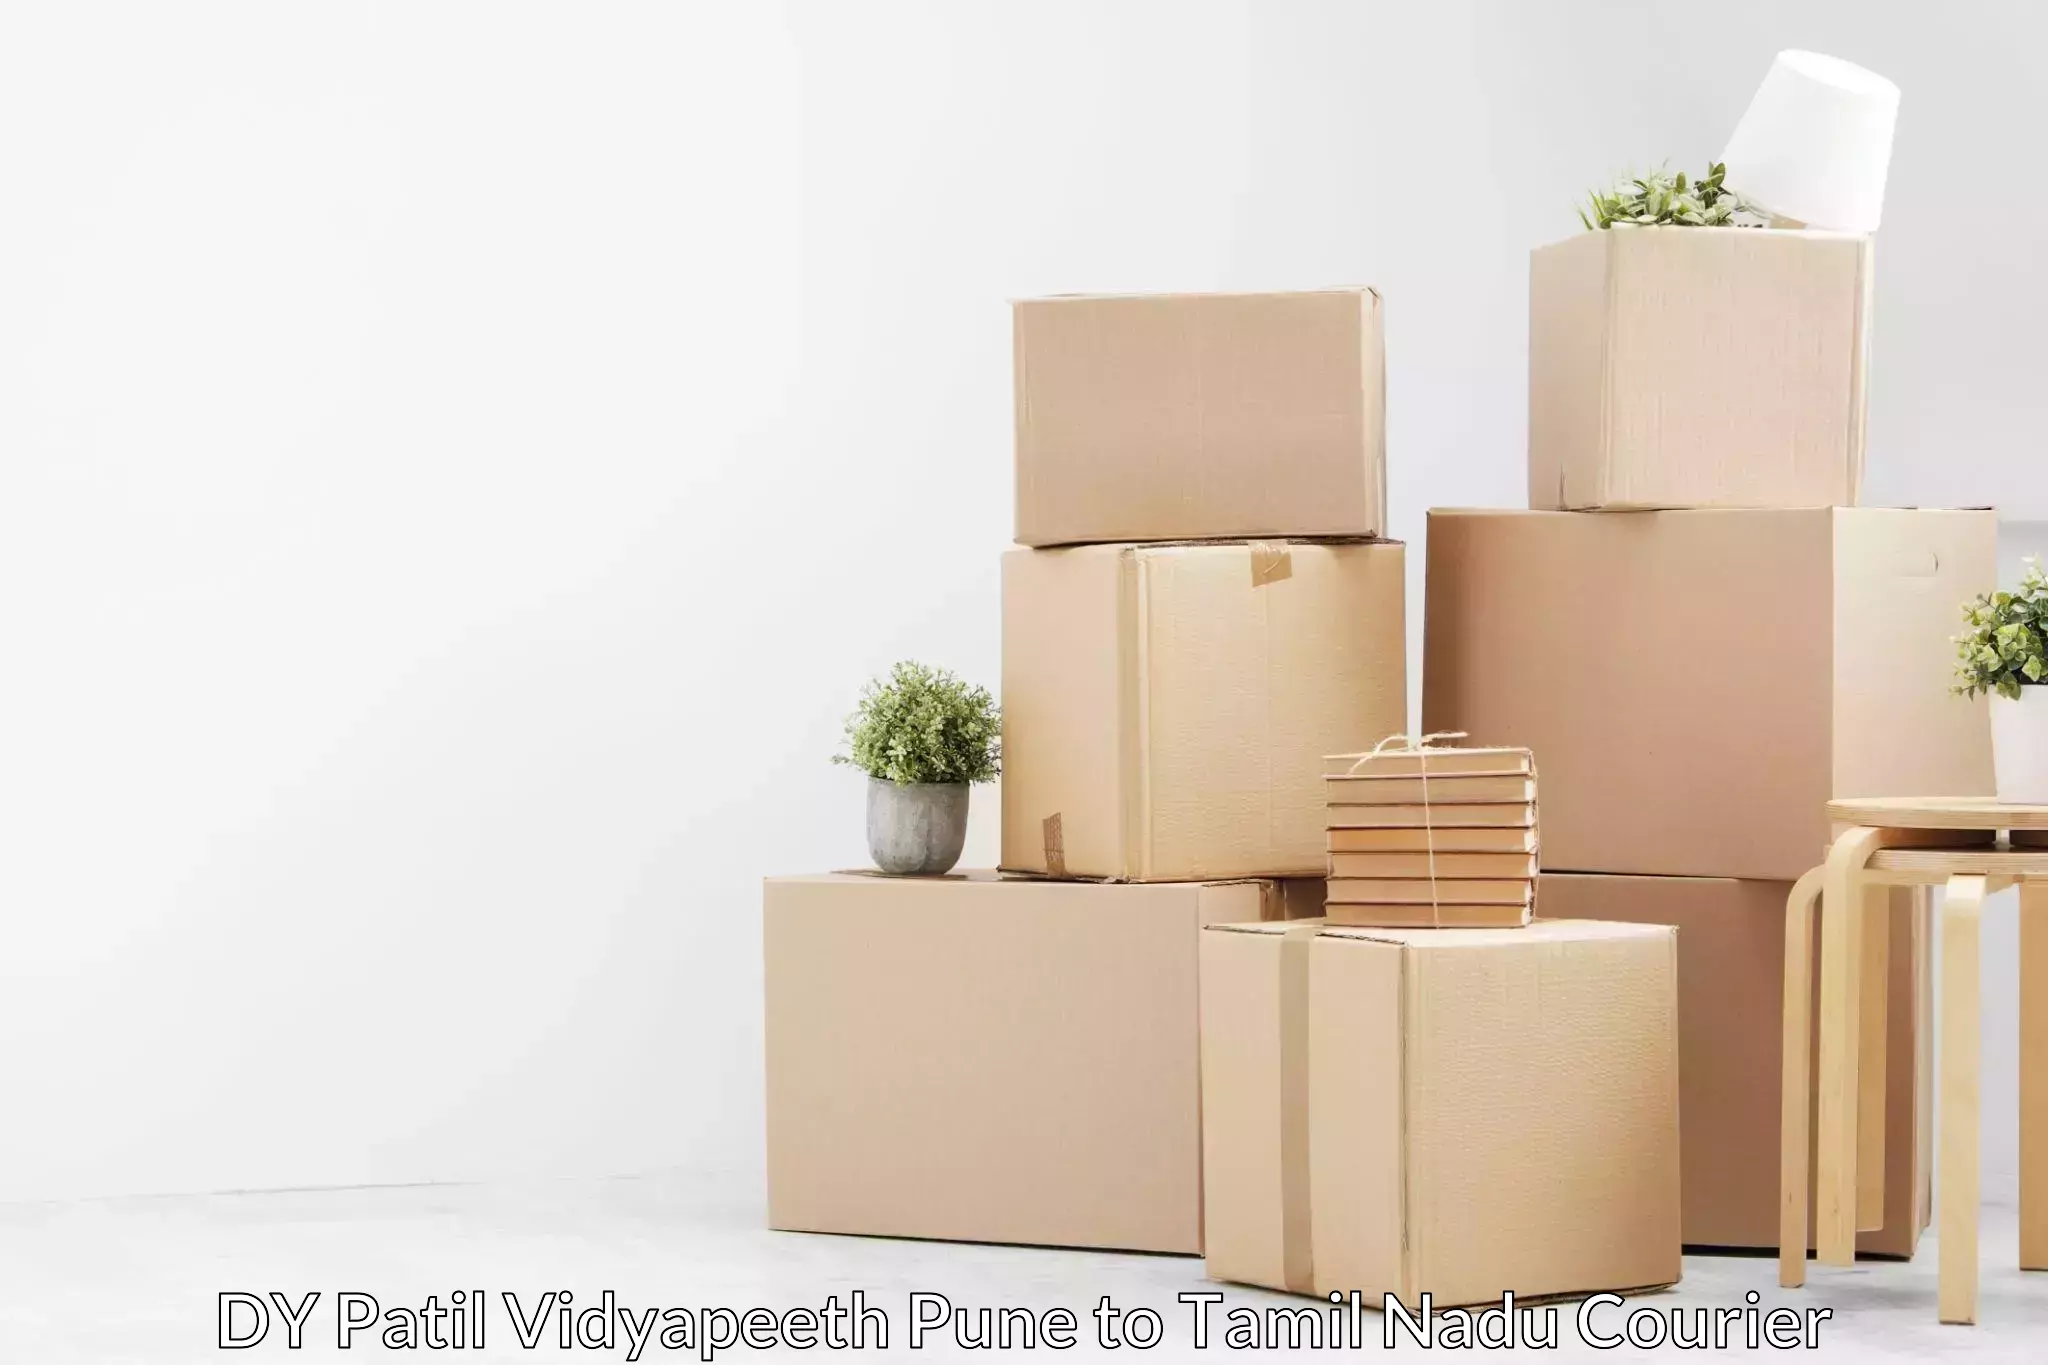 Professional furniture moving in DY Patil Vidyapeeth Pune to Tamil Nadu